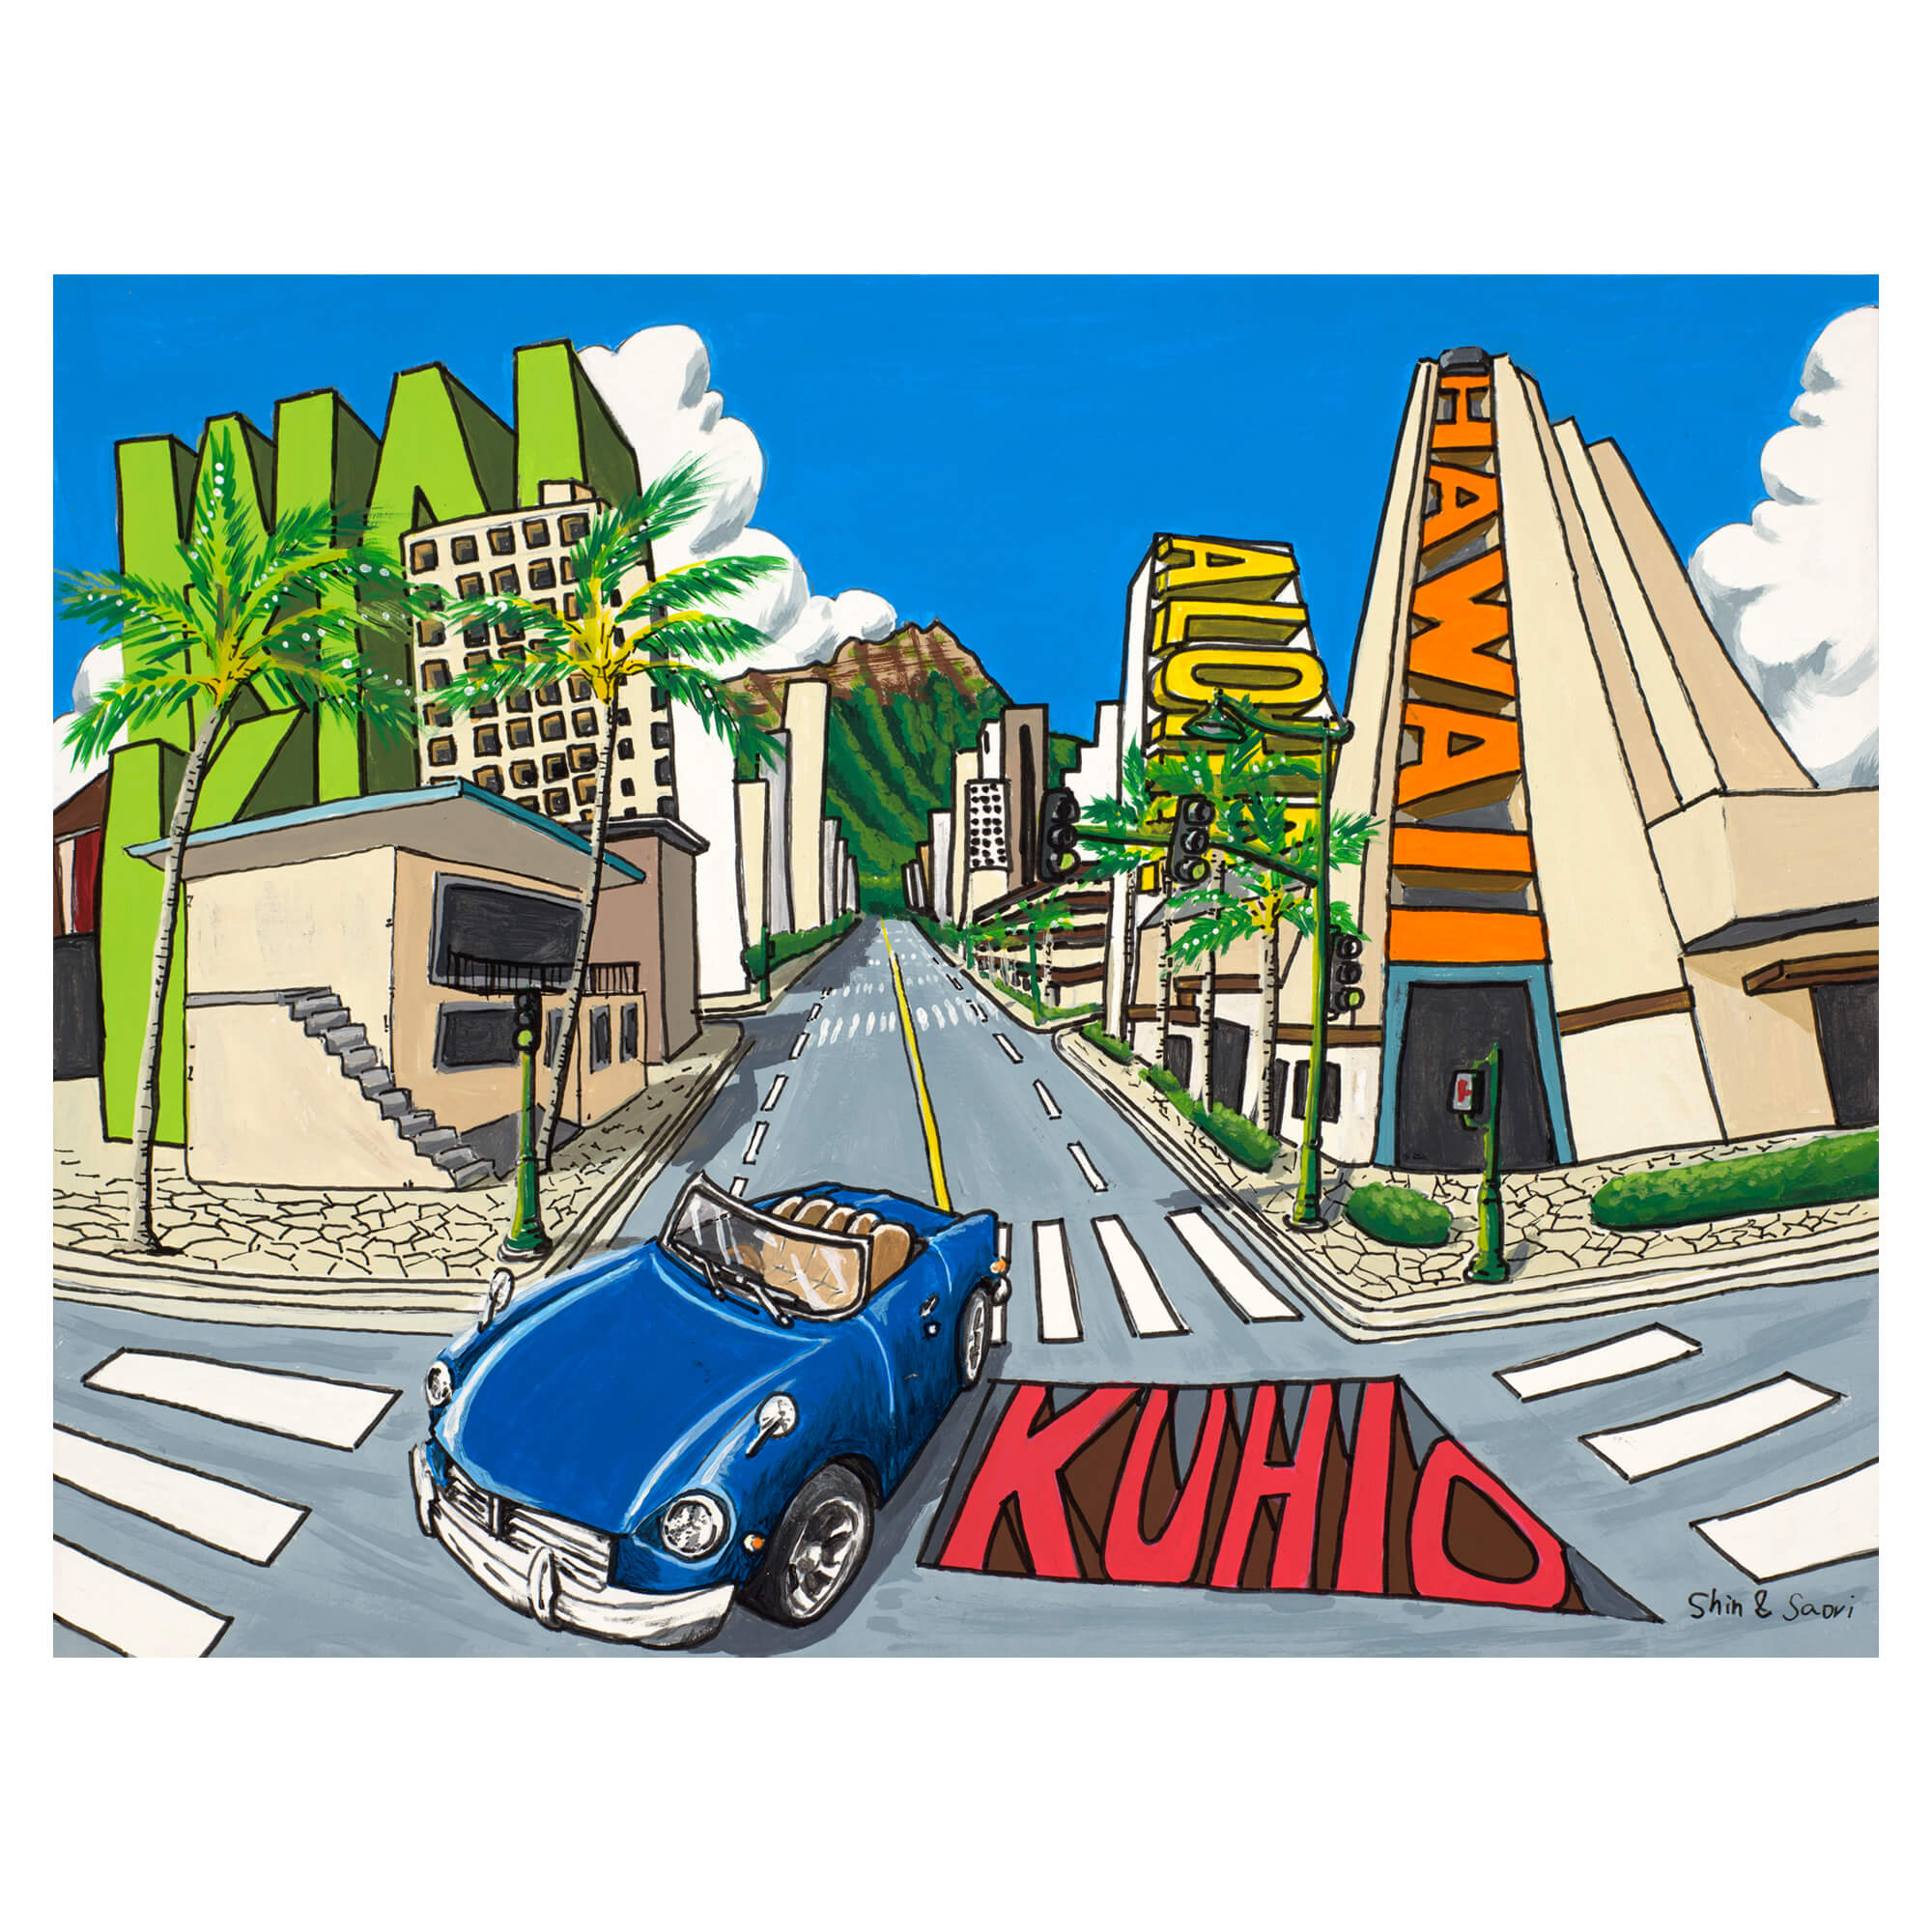 A colorful depiction of Kuhio Ave by Hawaii artist Shin Kato